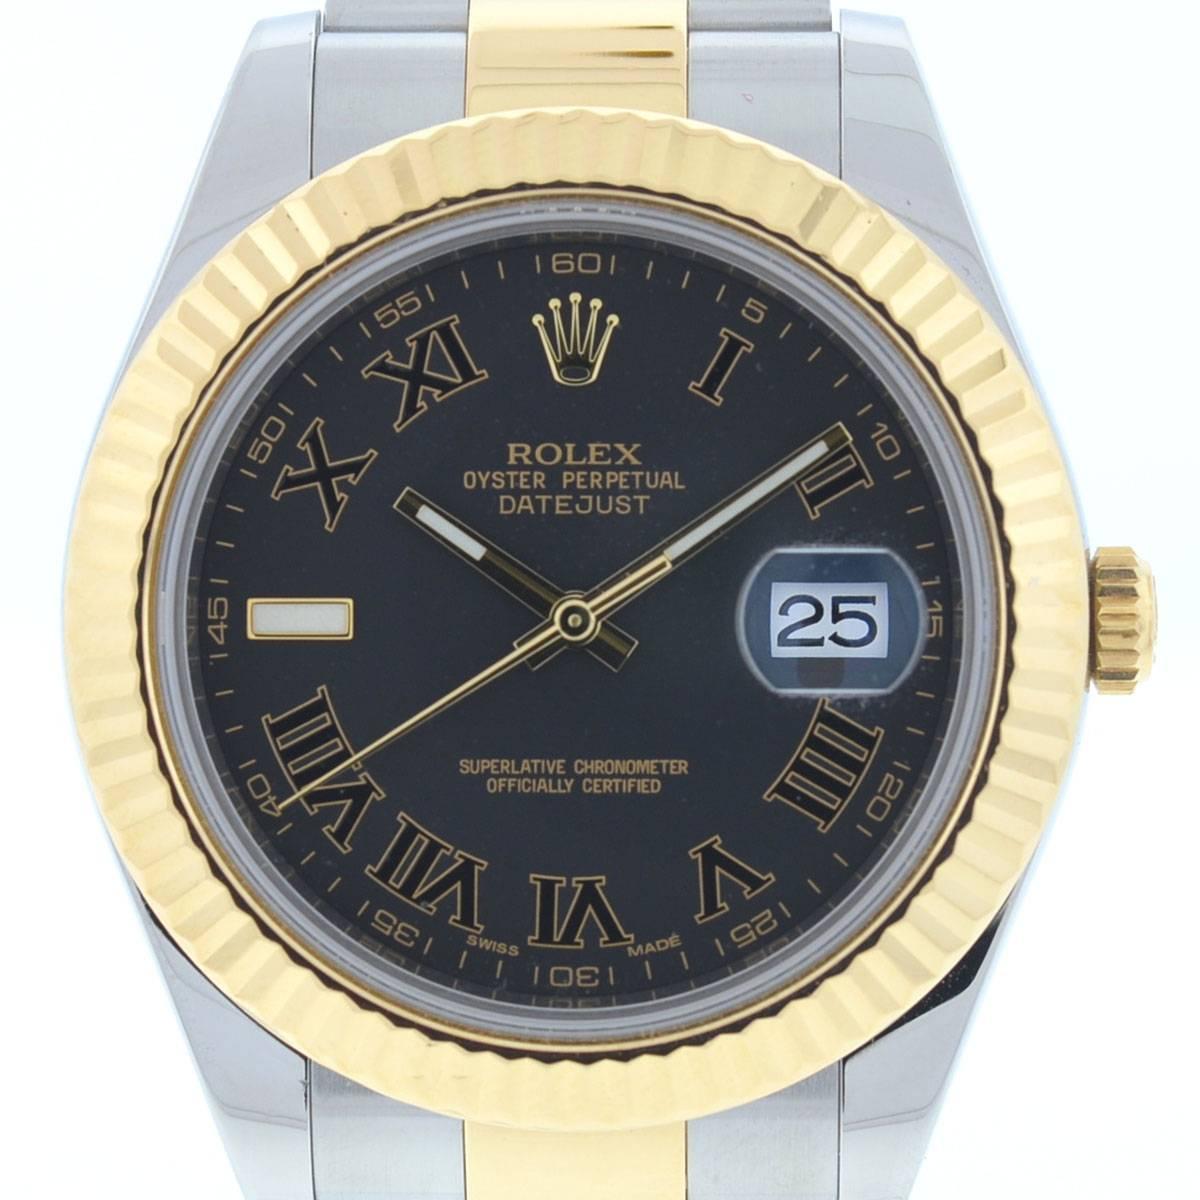 Company - Rolex
Style - Dress/Formal
Model - Datejust II
Reference Number - 116333 (Random serial)
Case Metal - Stainless Steel
Case Measurement - 41 mm 
Bracelet - Two Tone (Fits a 7 1/4